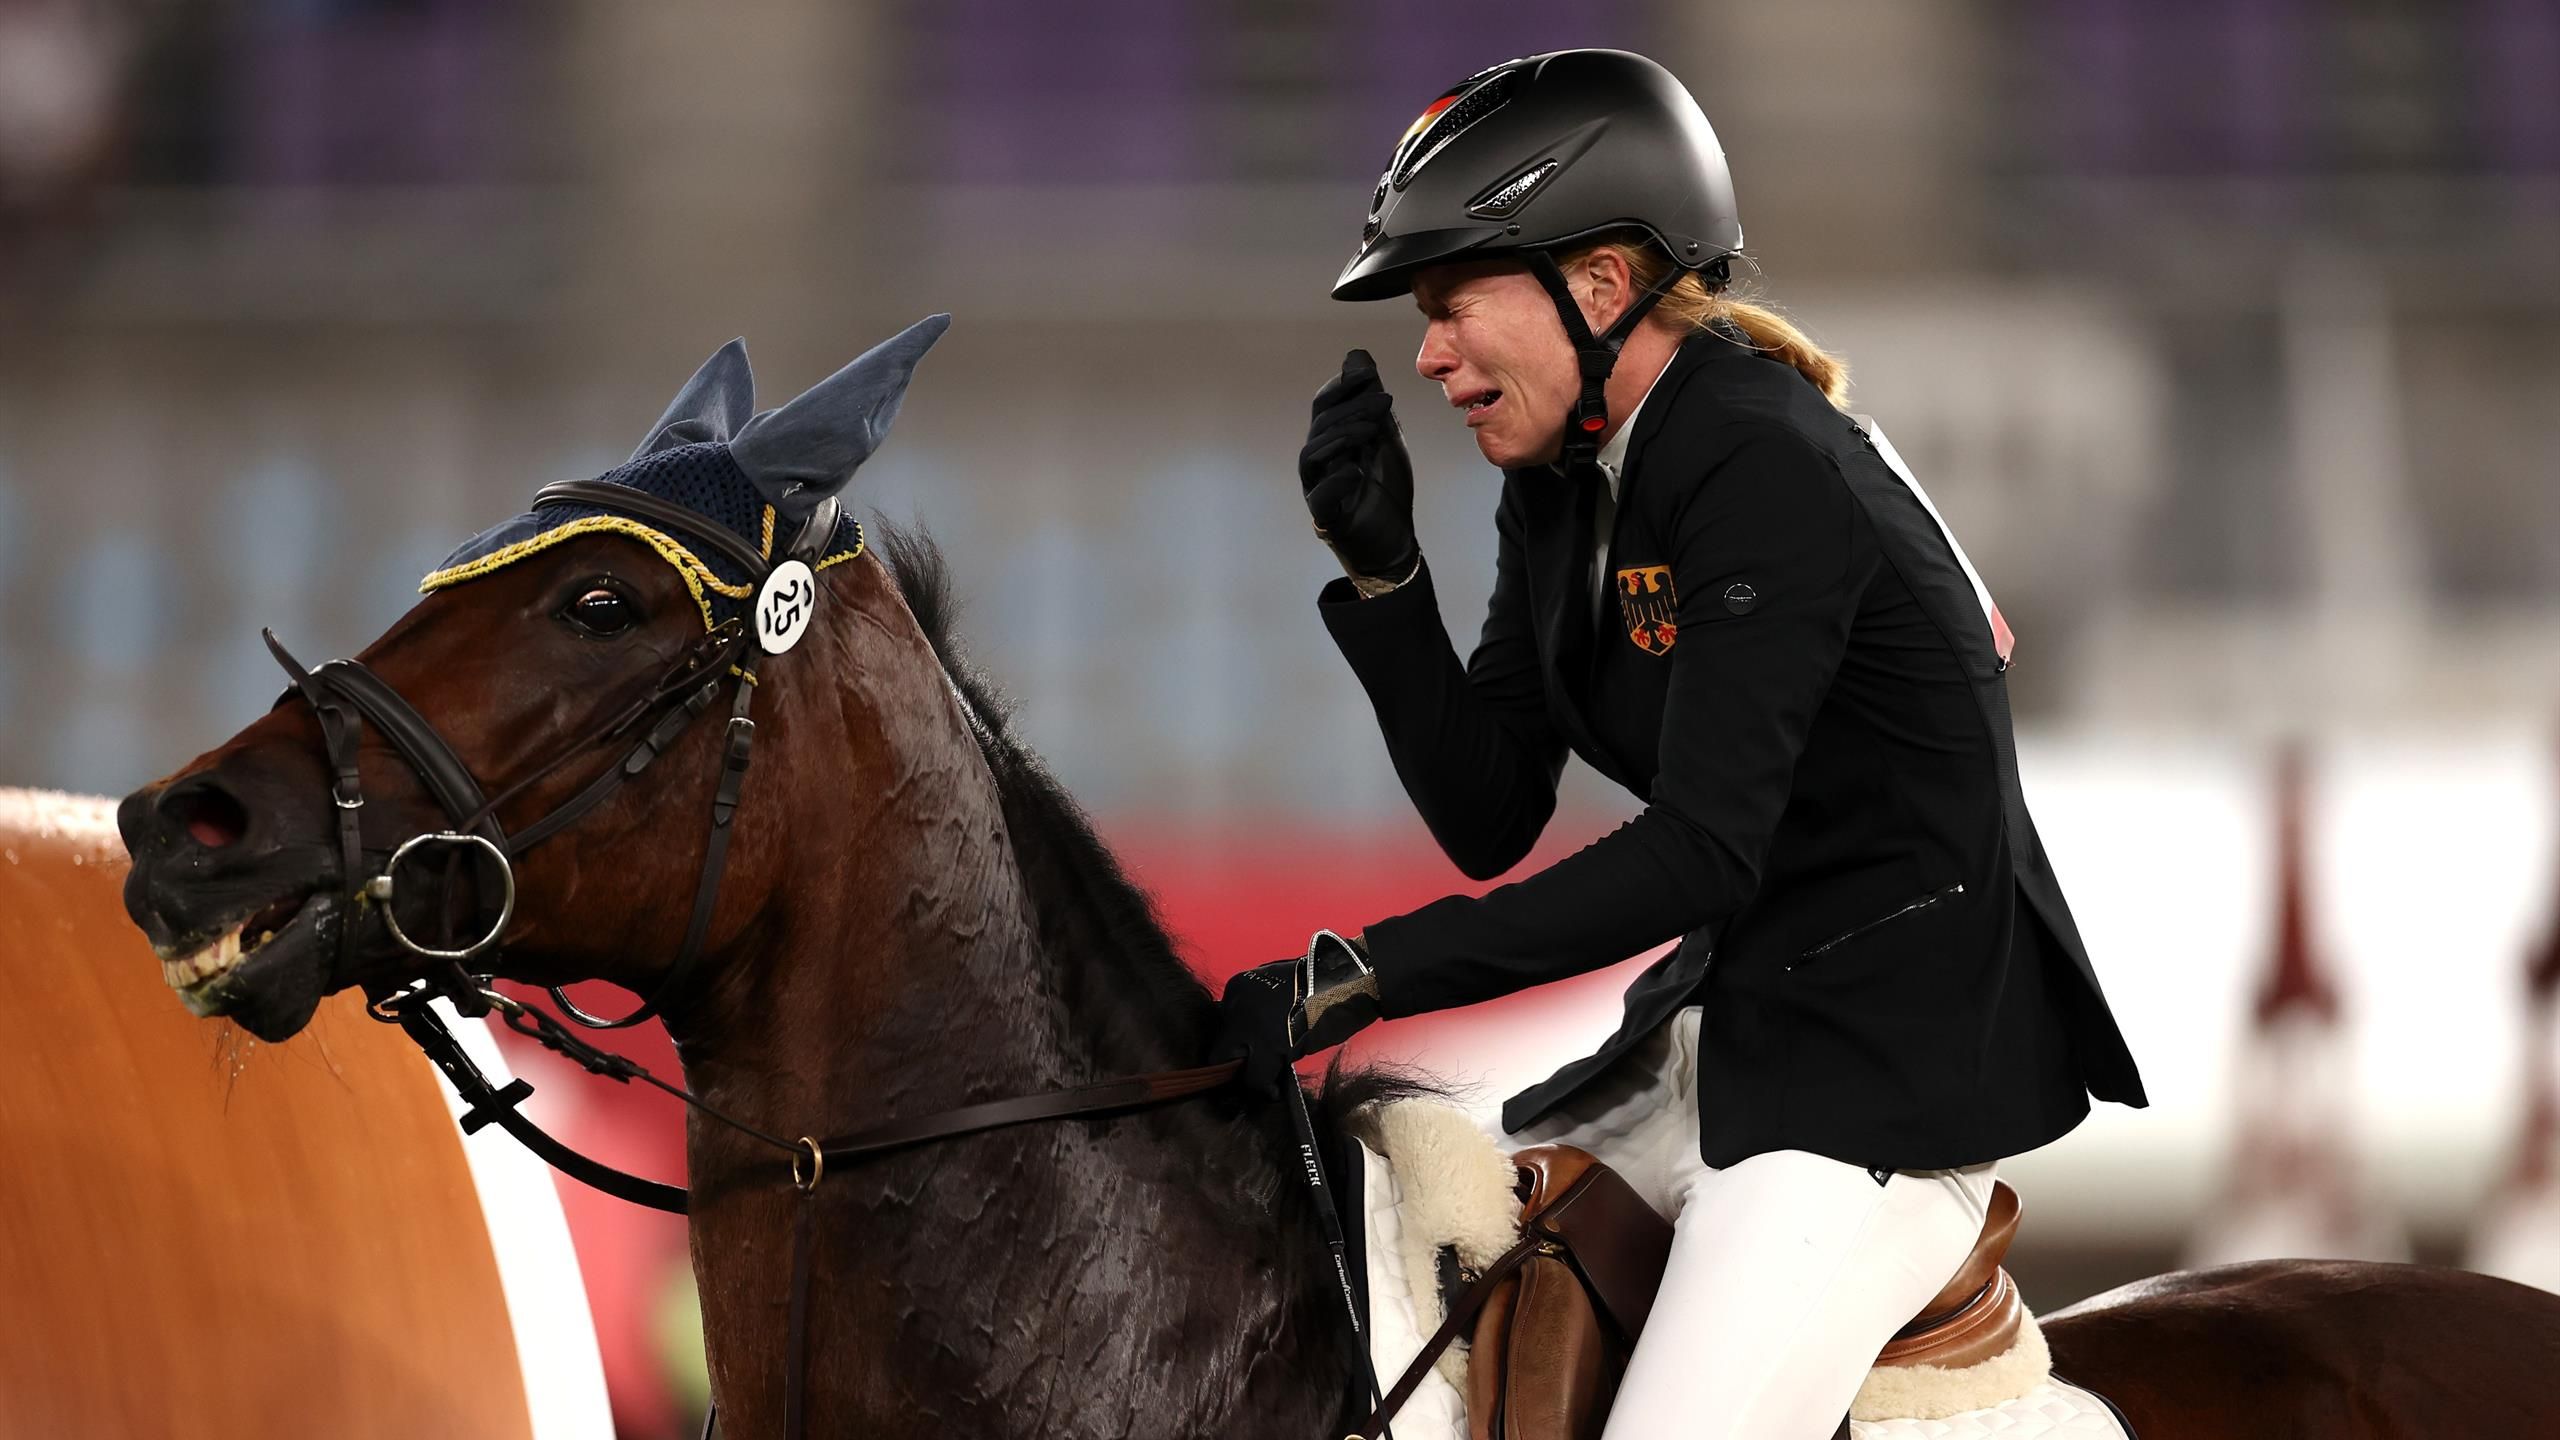 Modern Pentathlon Obstacle racing set to replace equestrian after